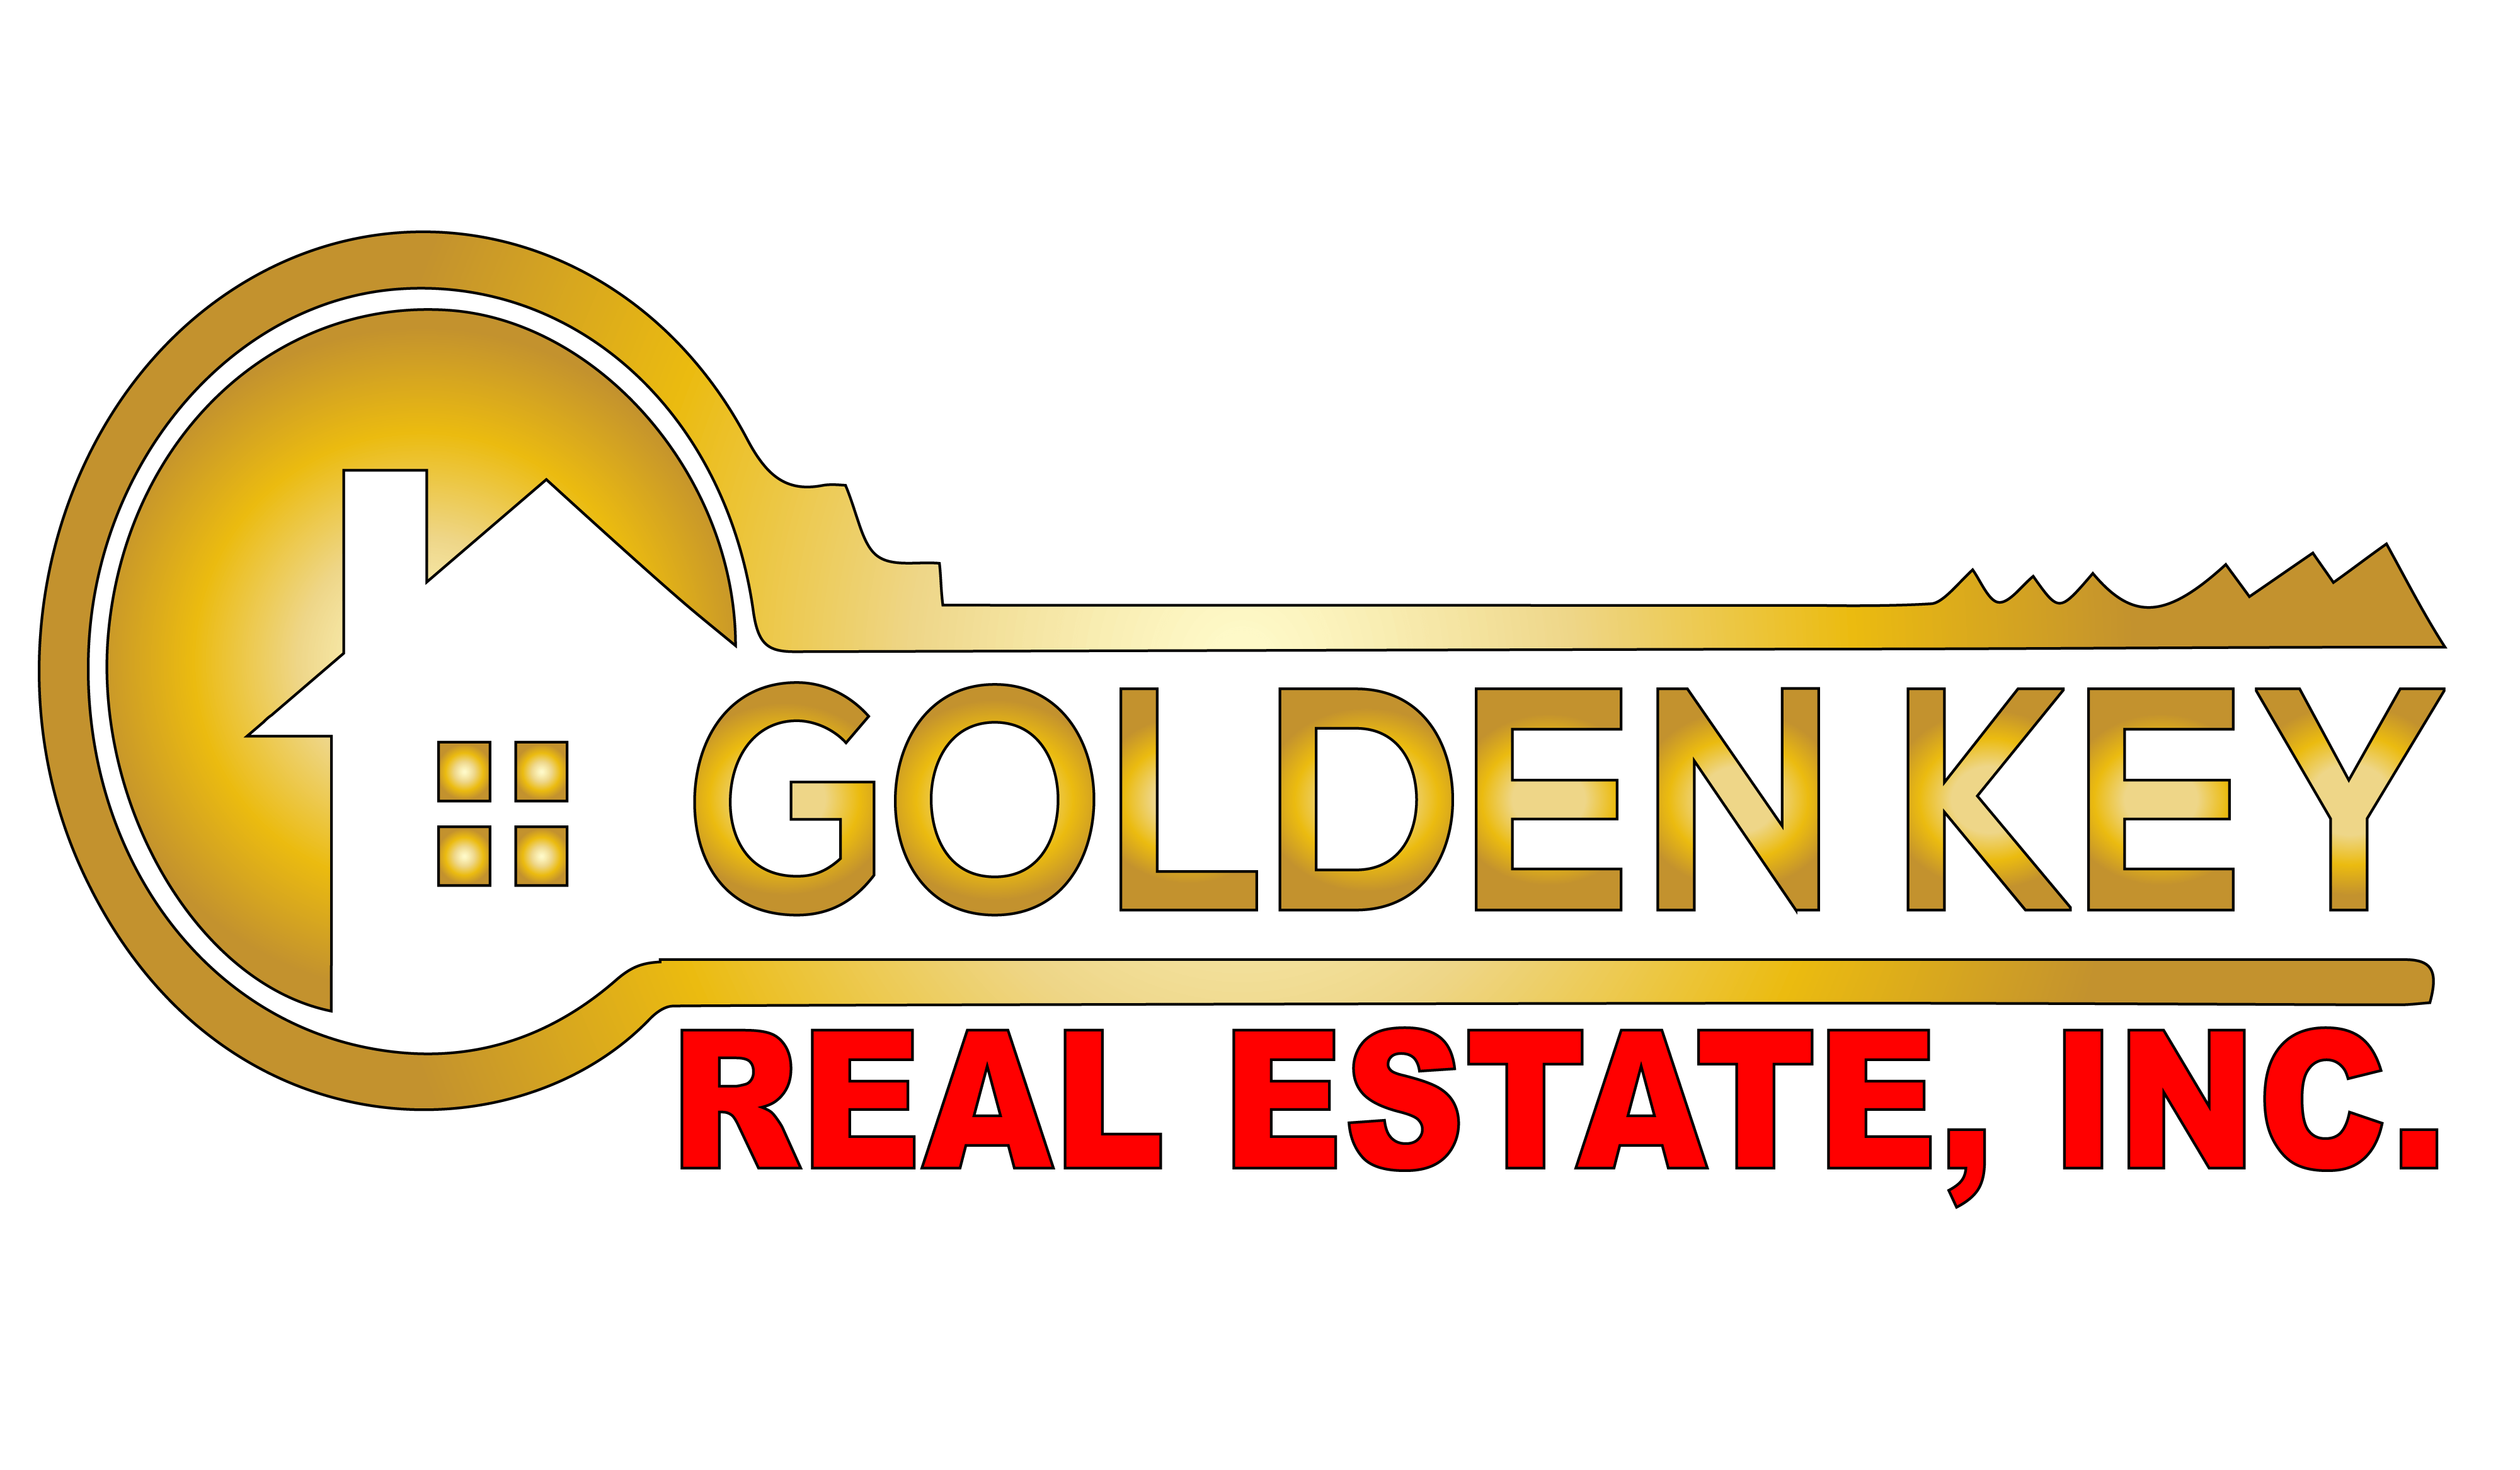 one key real estate